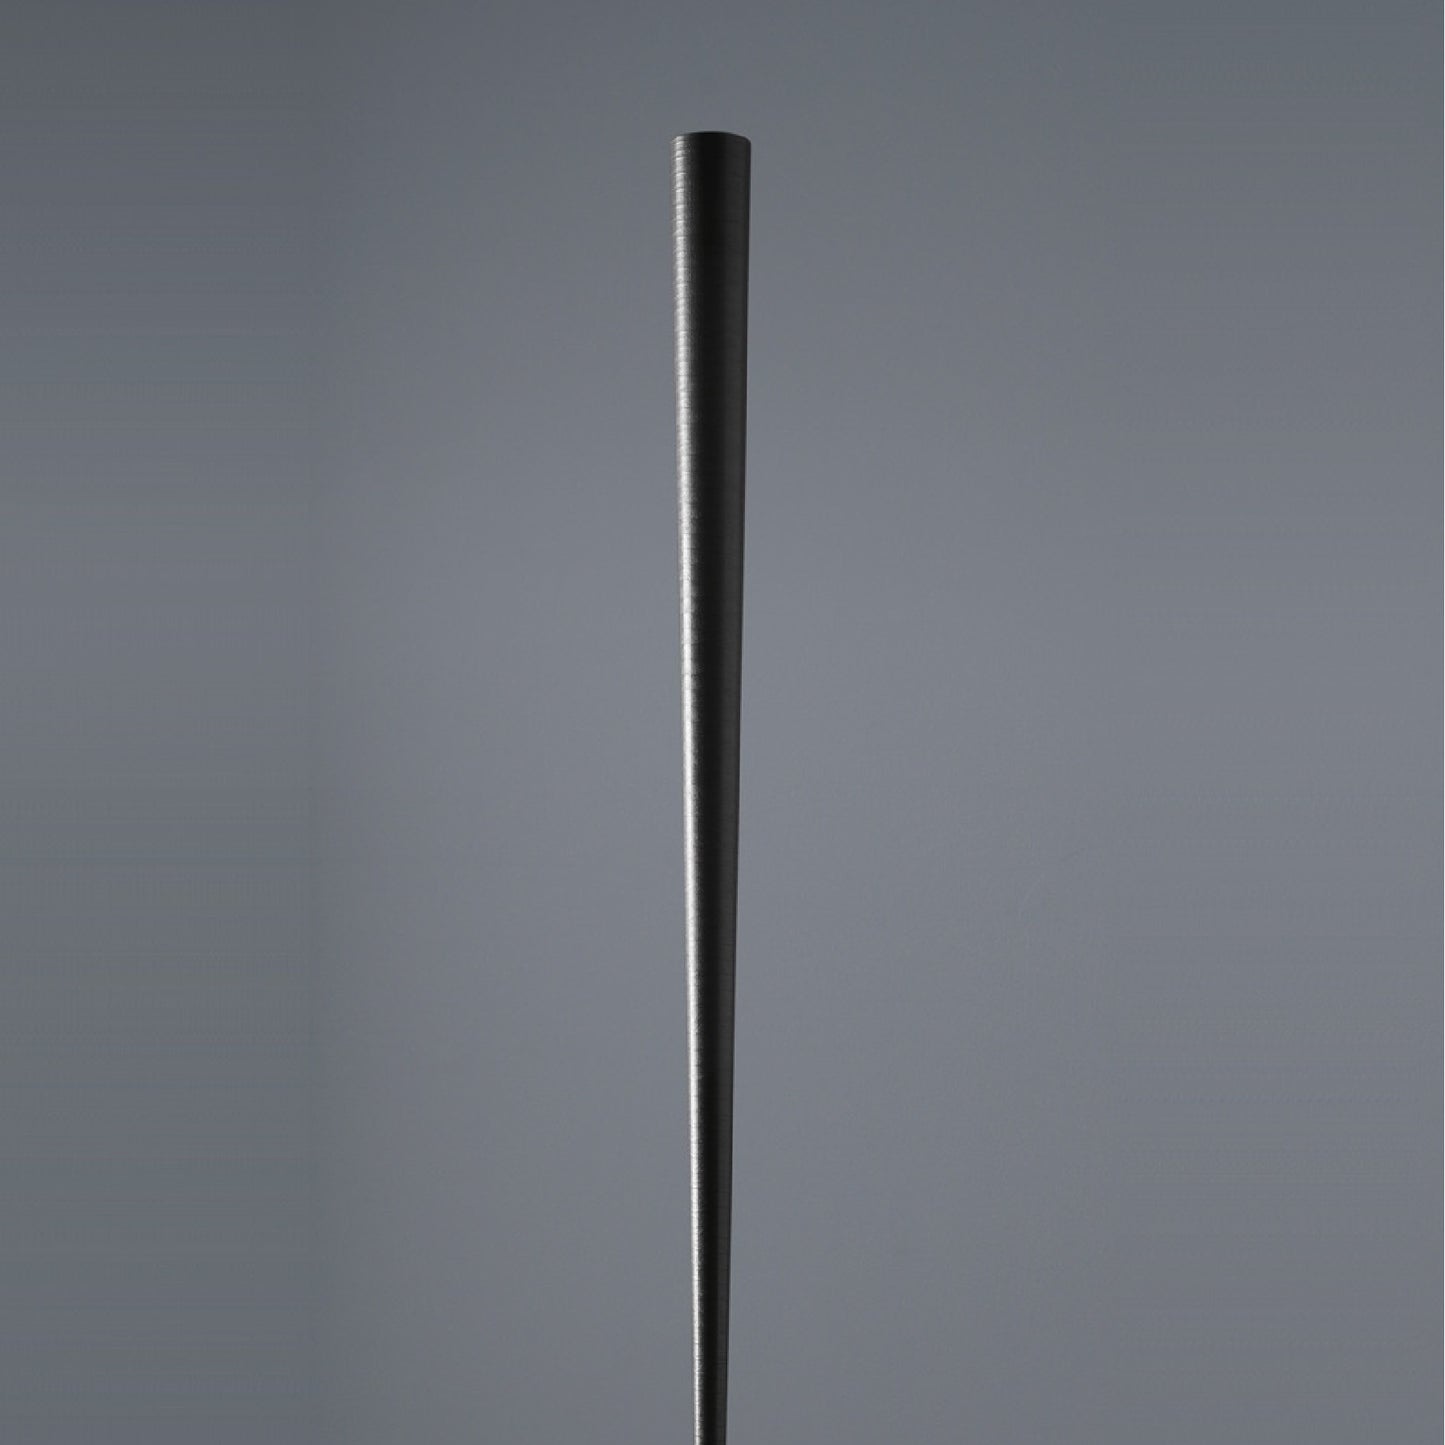 Drink Floor Lamp by Karboxx